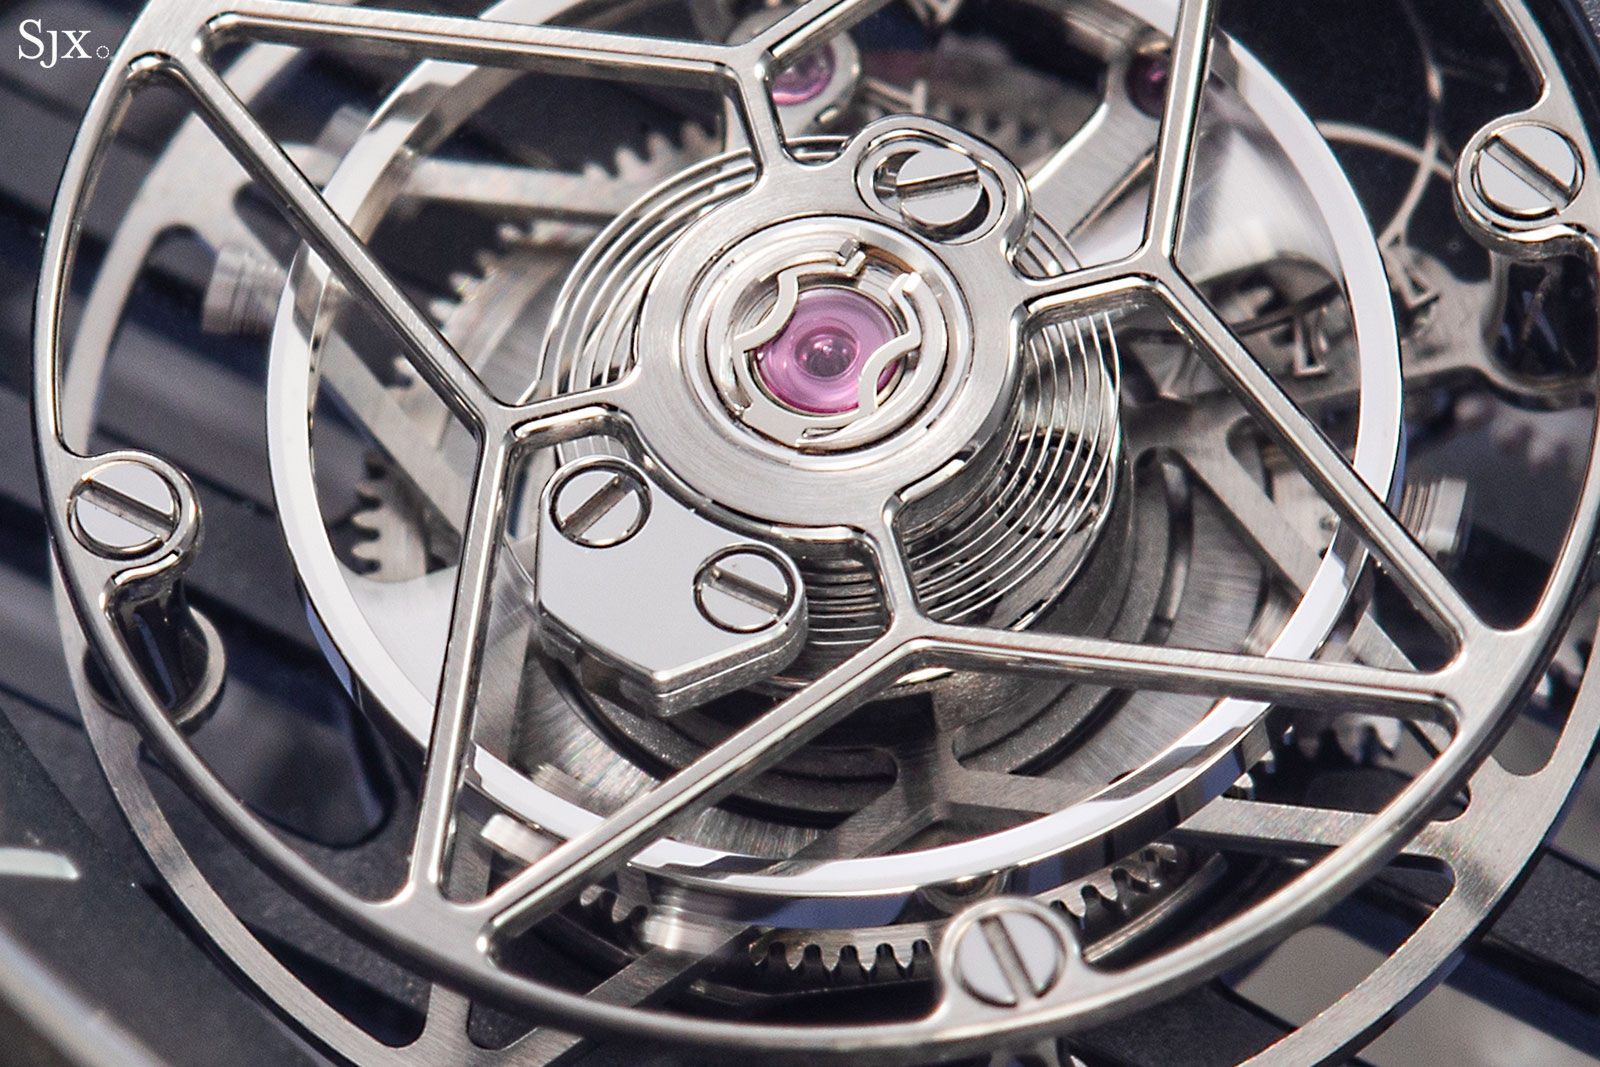 Horological Meandering - Hands on review of the Louis Vuitton Tambour Curve  Tourbillon Volant